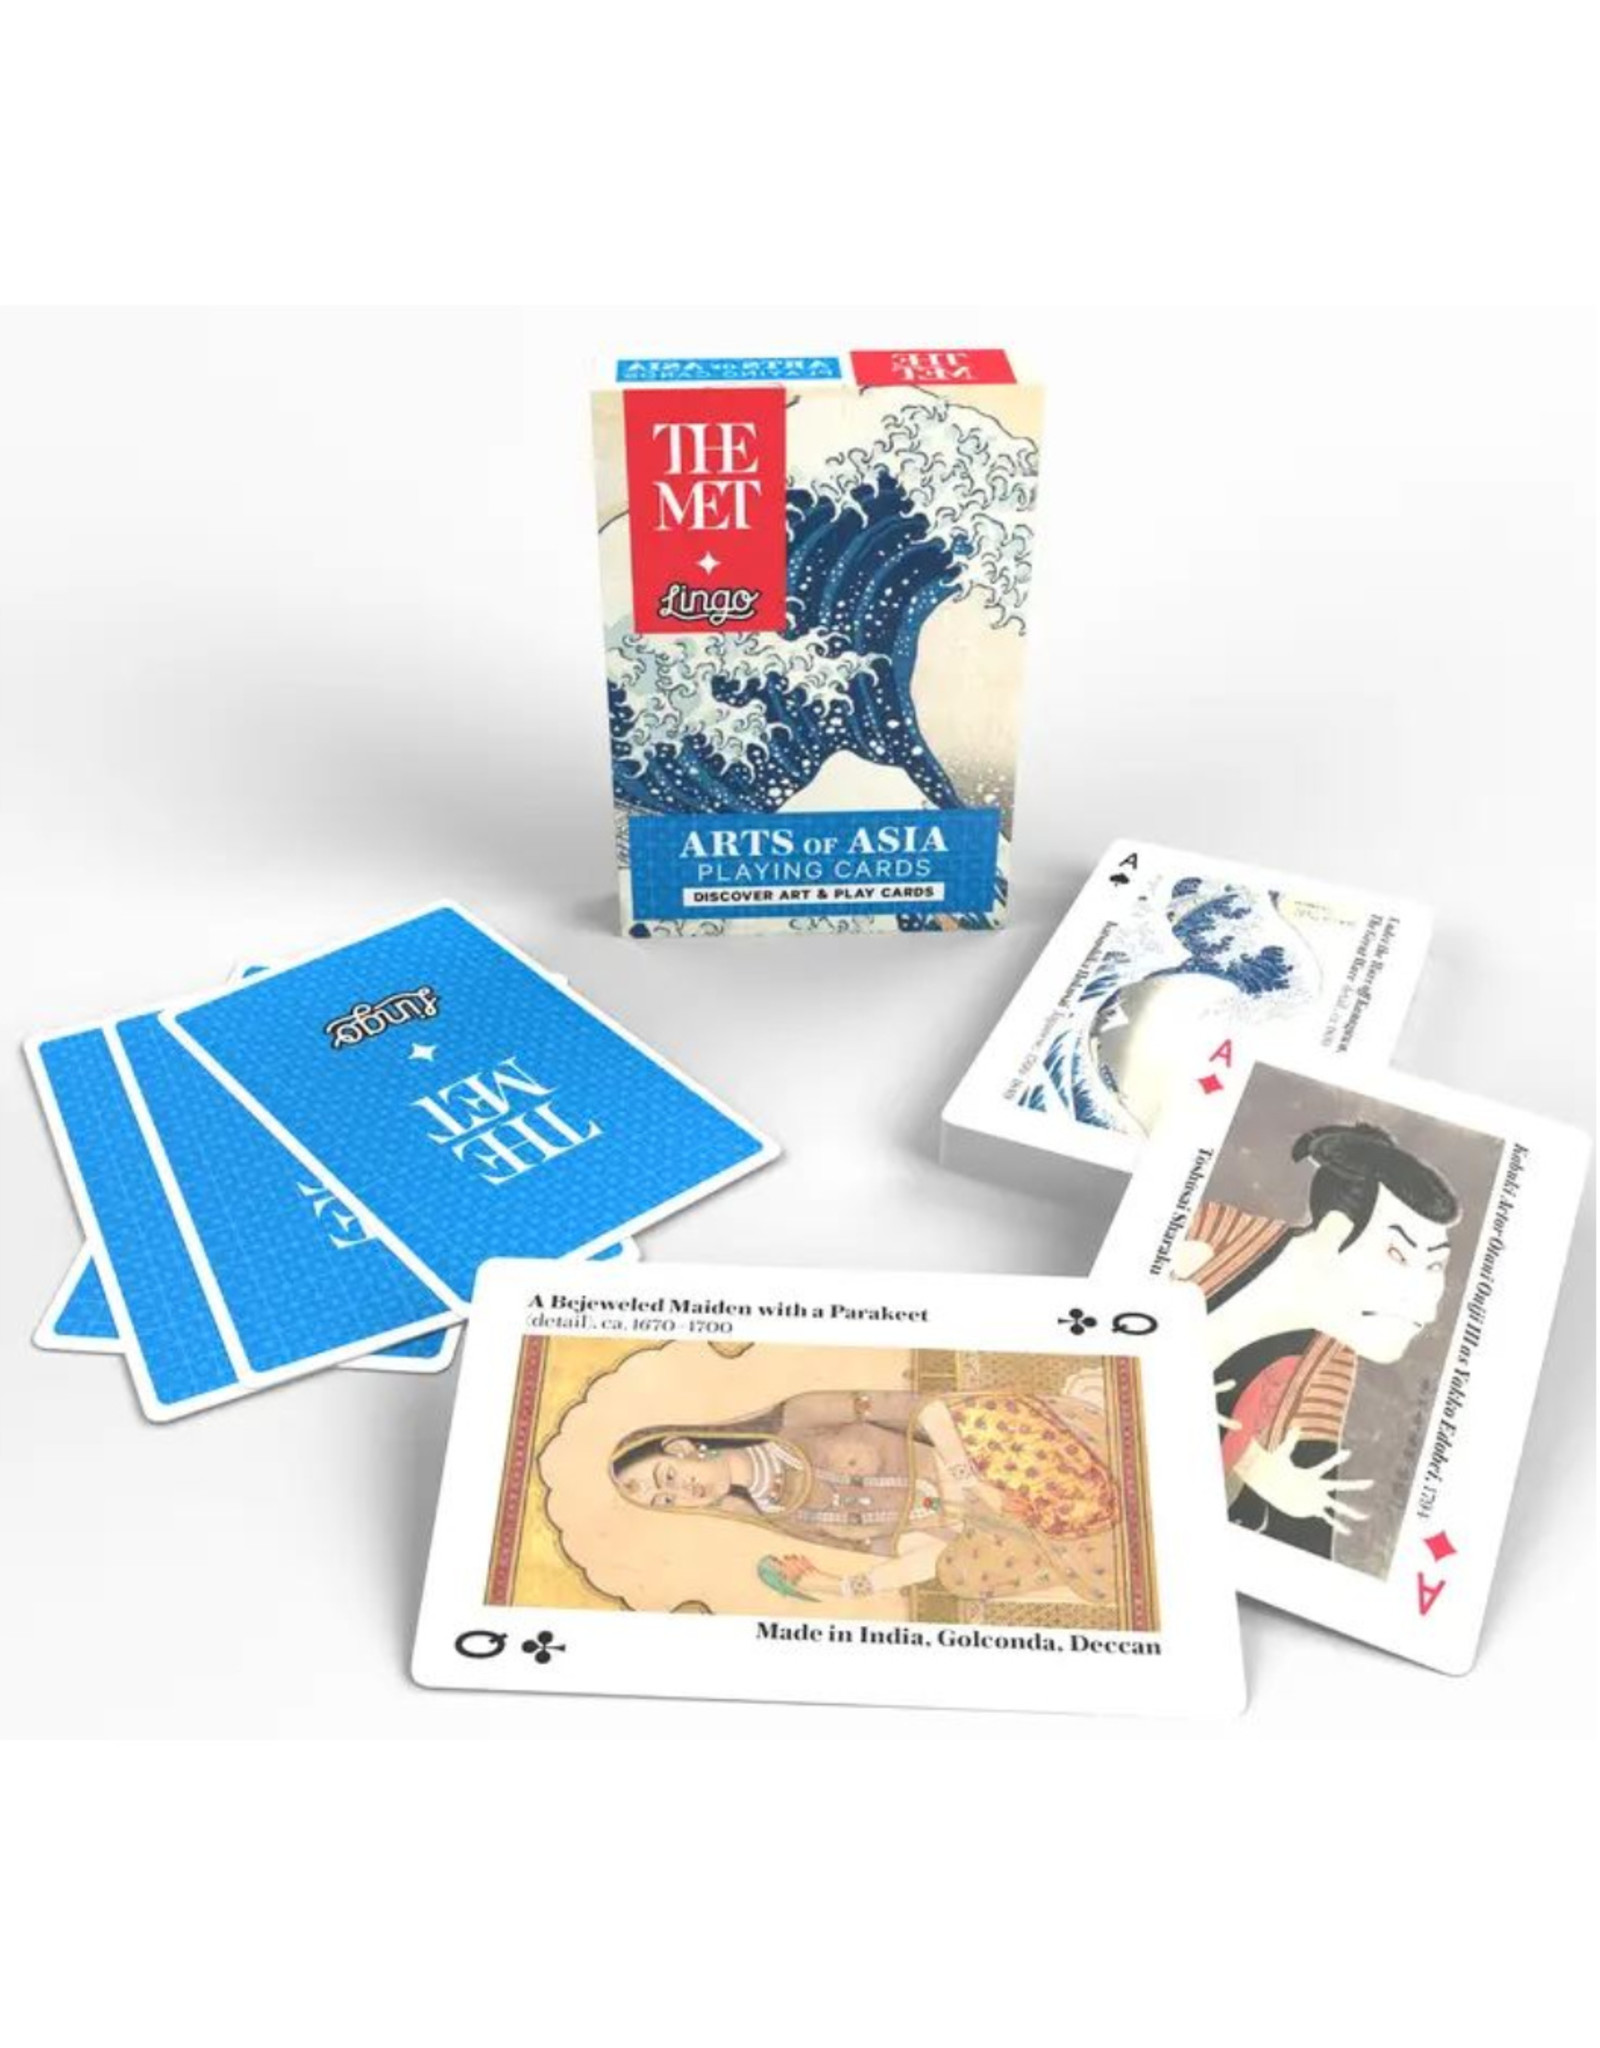 Art of Asia Playing Cards